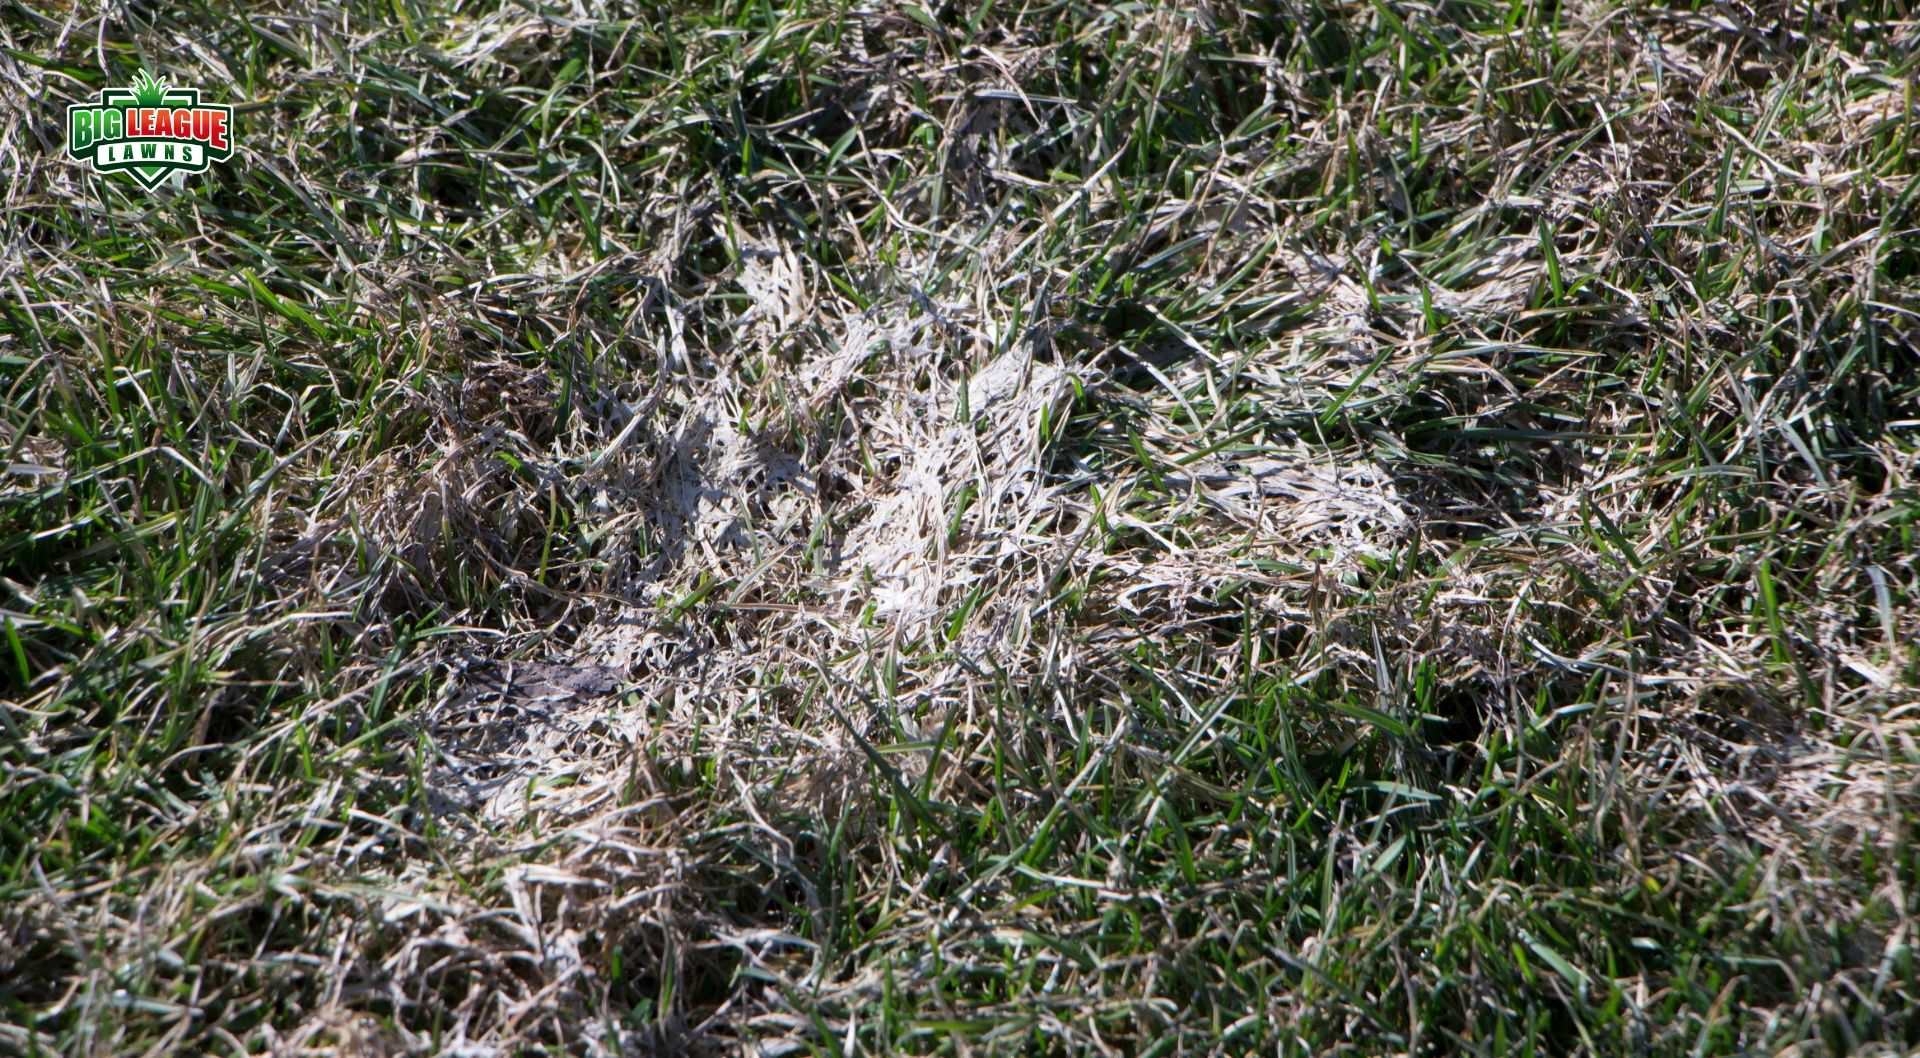 Lawn Fungus or Snow Mold on Grass